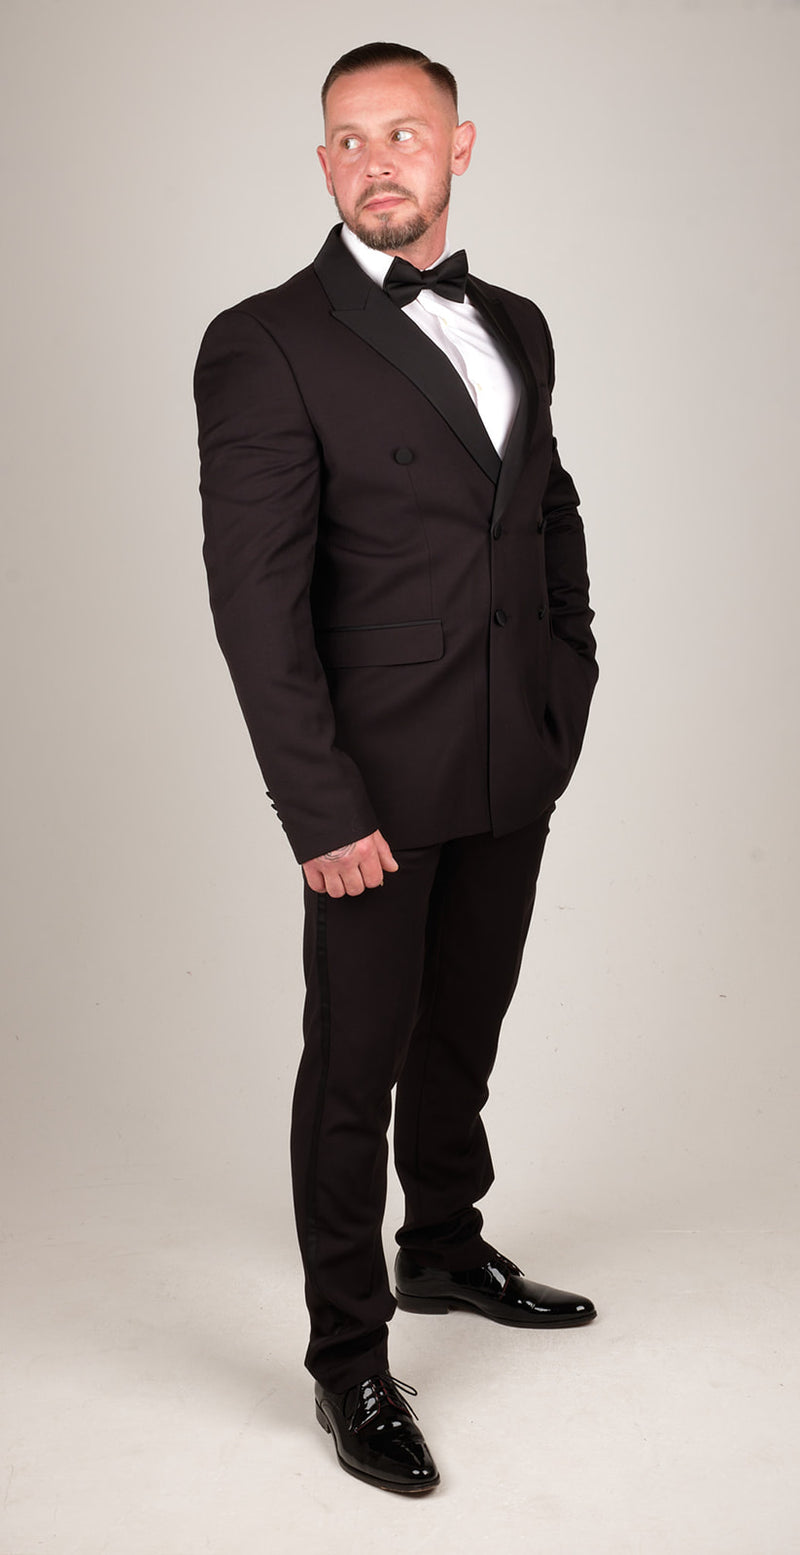 * Mens Complete 3 Piece Tuxedo Dinner Suit  * Complete With Blazer Jacket, Waistcoat & Suit Carrier  * Perfect For Any Formal or Smart Occasion Such As Parties, Weddings or Proms  * Amazing Black Fabric With Contrasting Satin Lapels & Trim, Tailored Fit (in between slim & regular fit) - Party Wear |  Office Wear